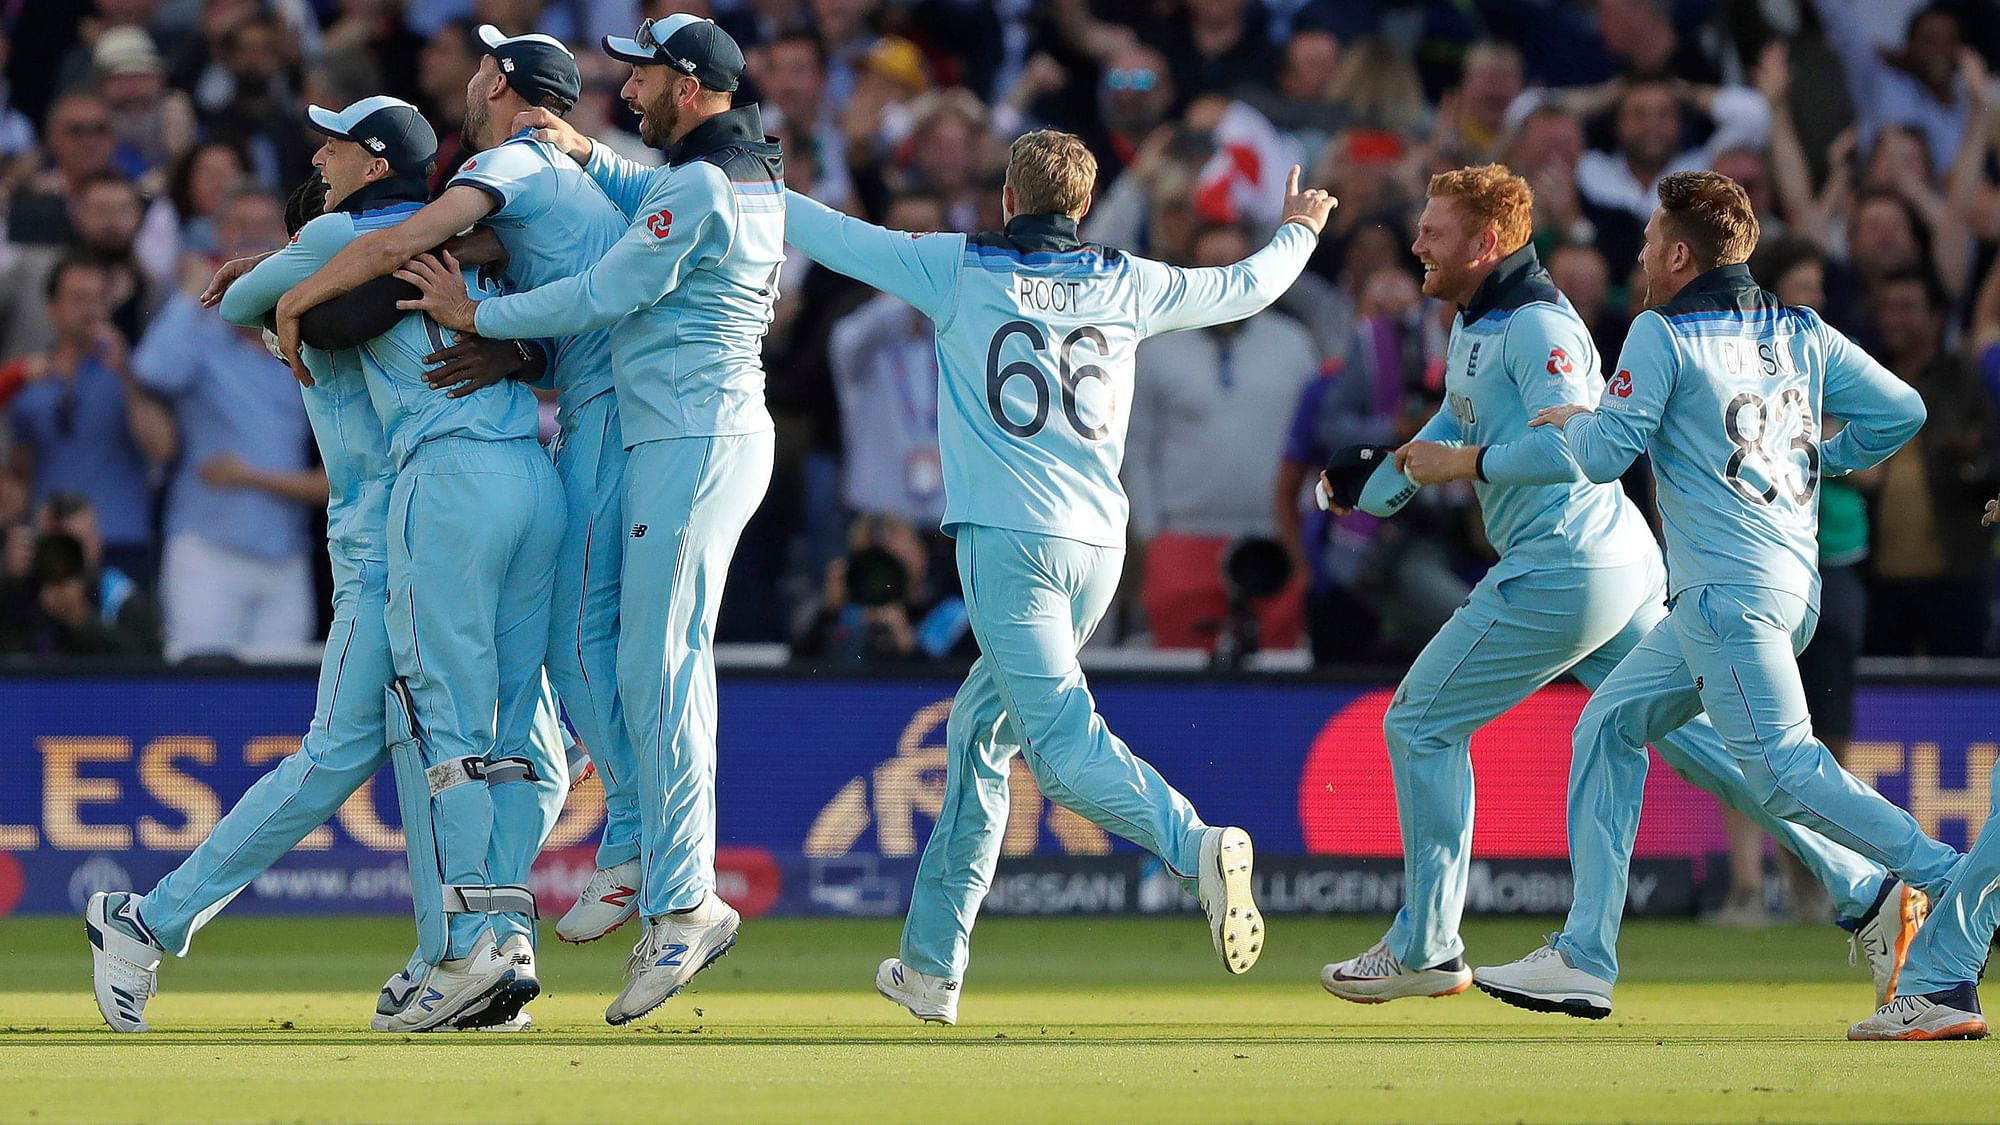 England won in the Super Over to be crowned World Cup champions for the very first time.